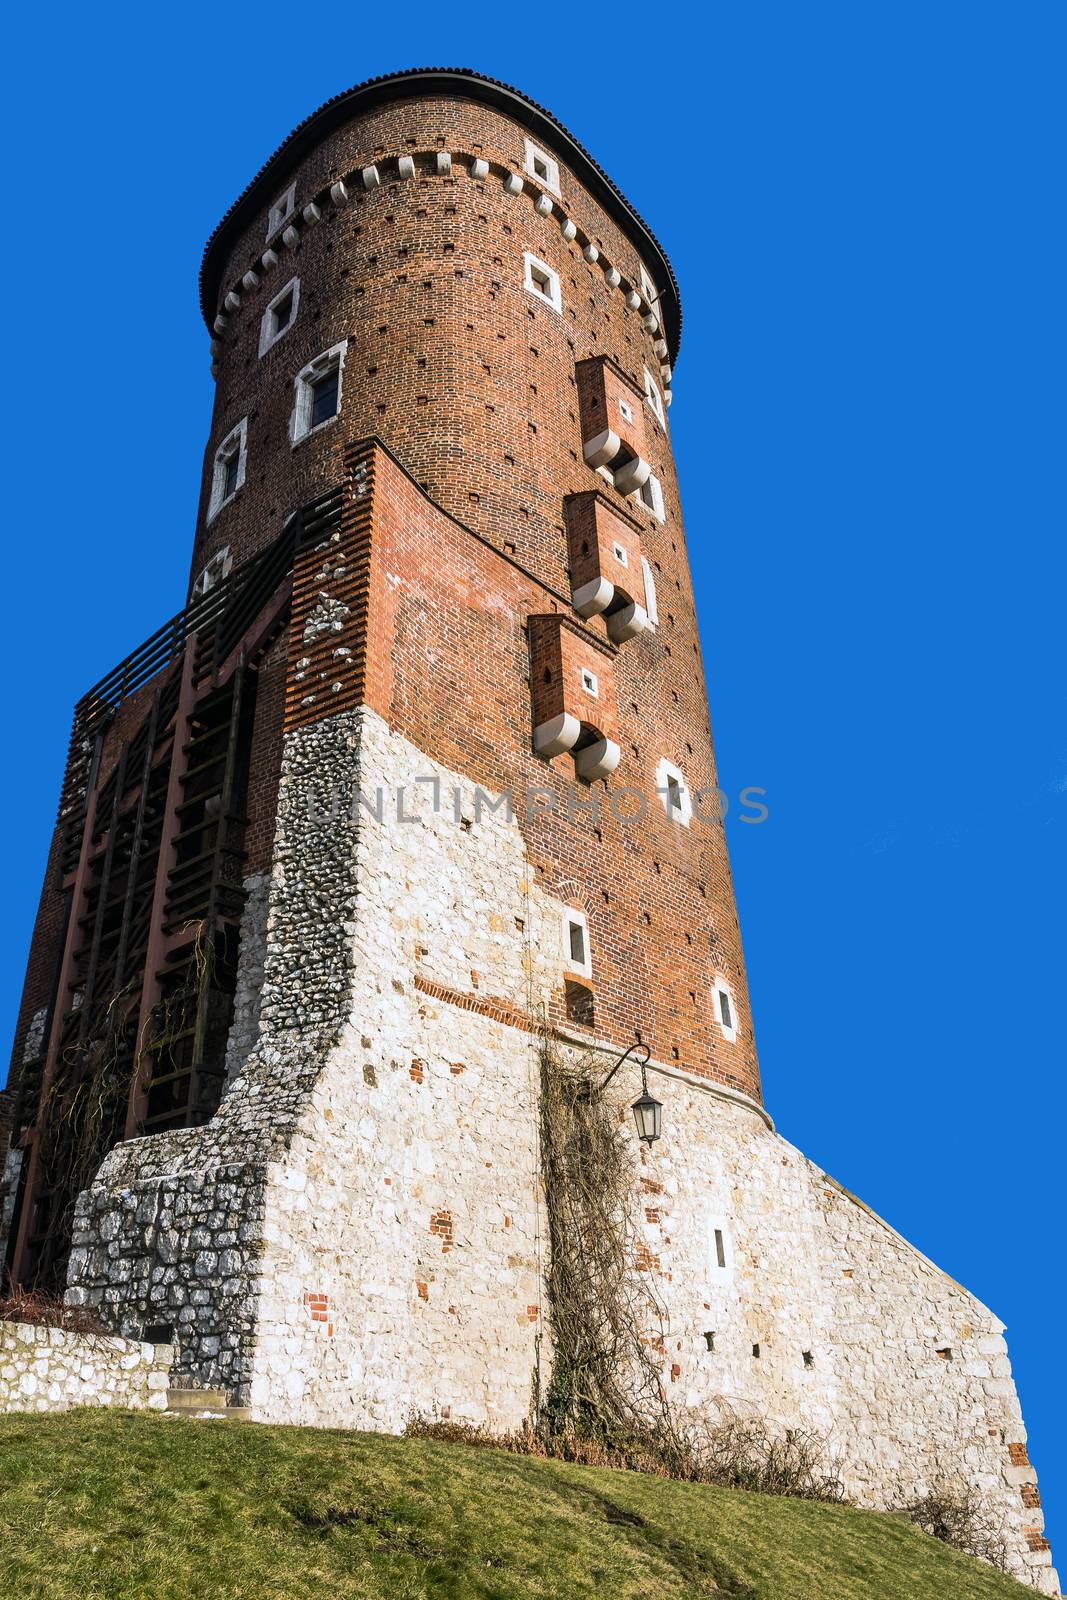 Ancient tower - a part of fortifications surrounding Wawel Royal Castle in Krakow, Poland.